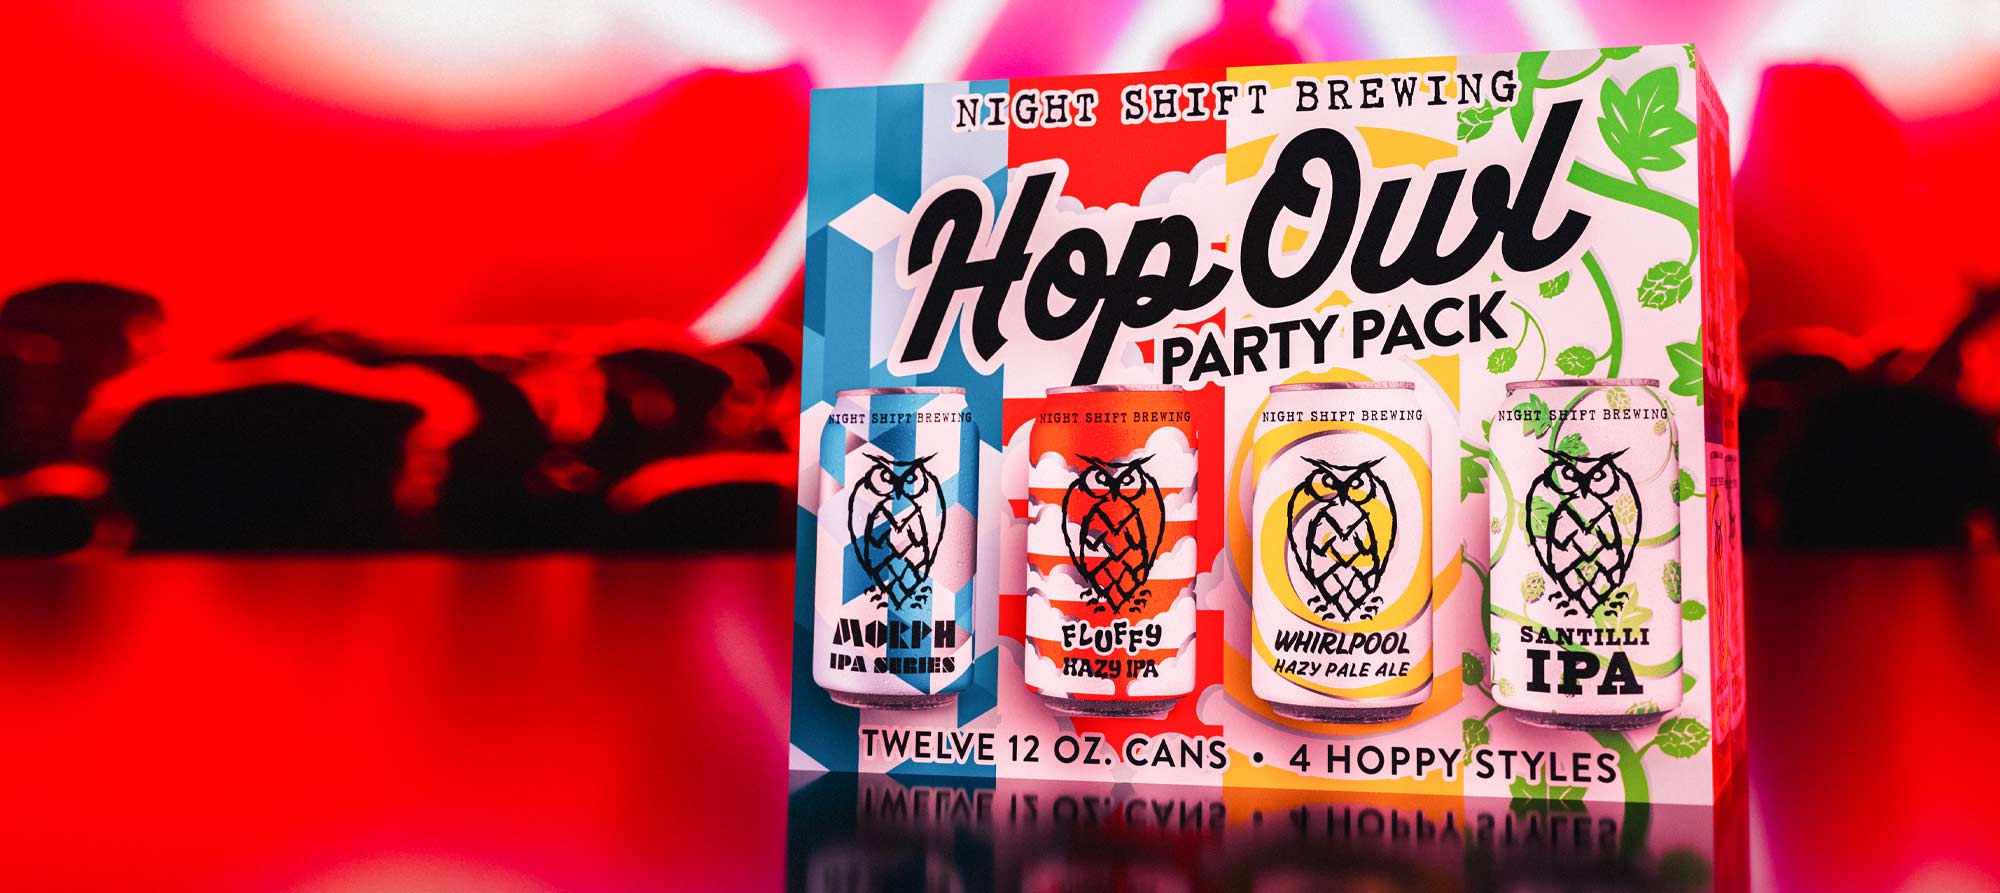 hop owl party pack